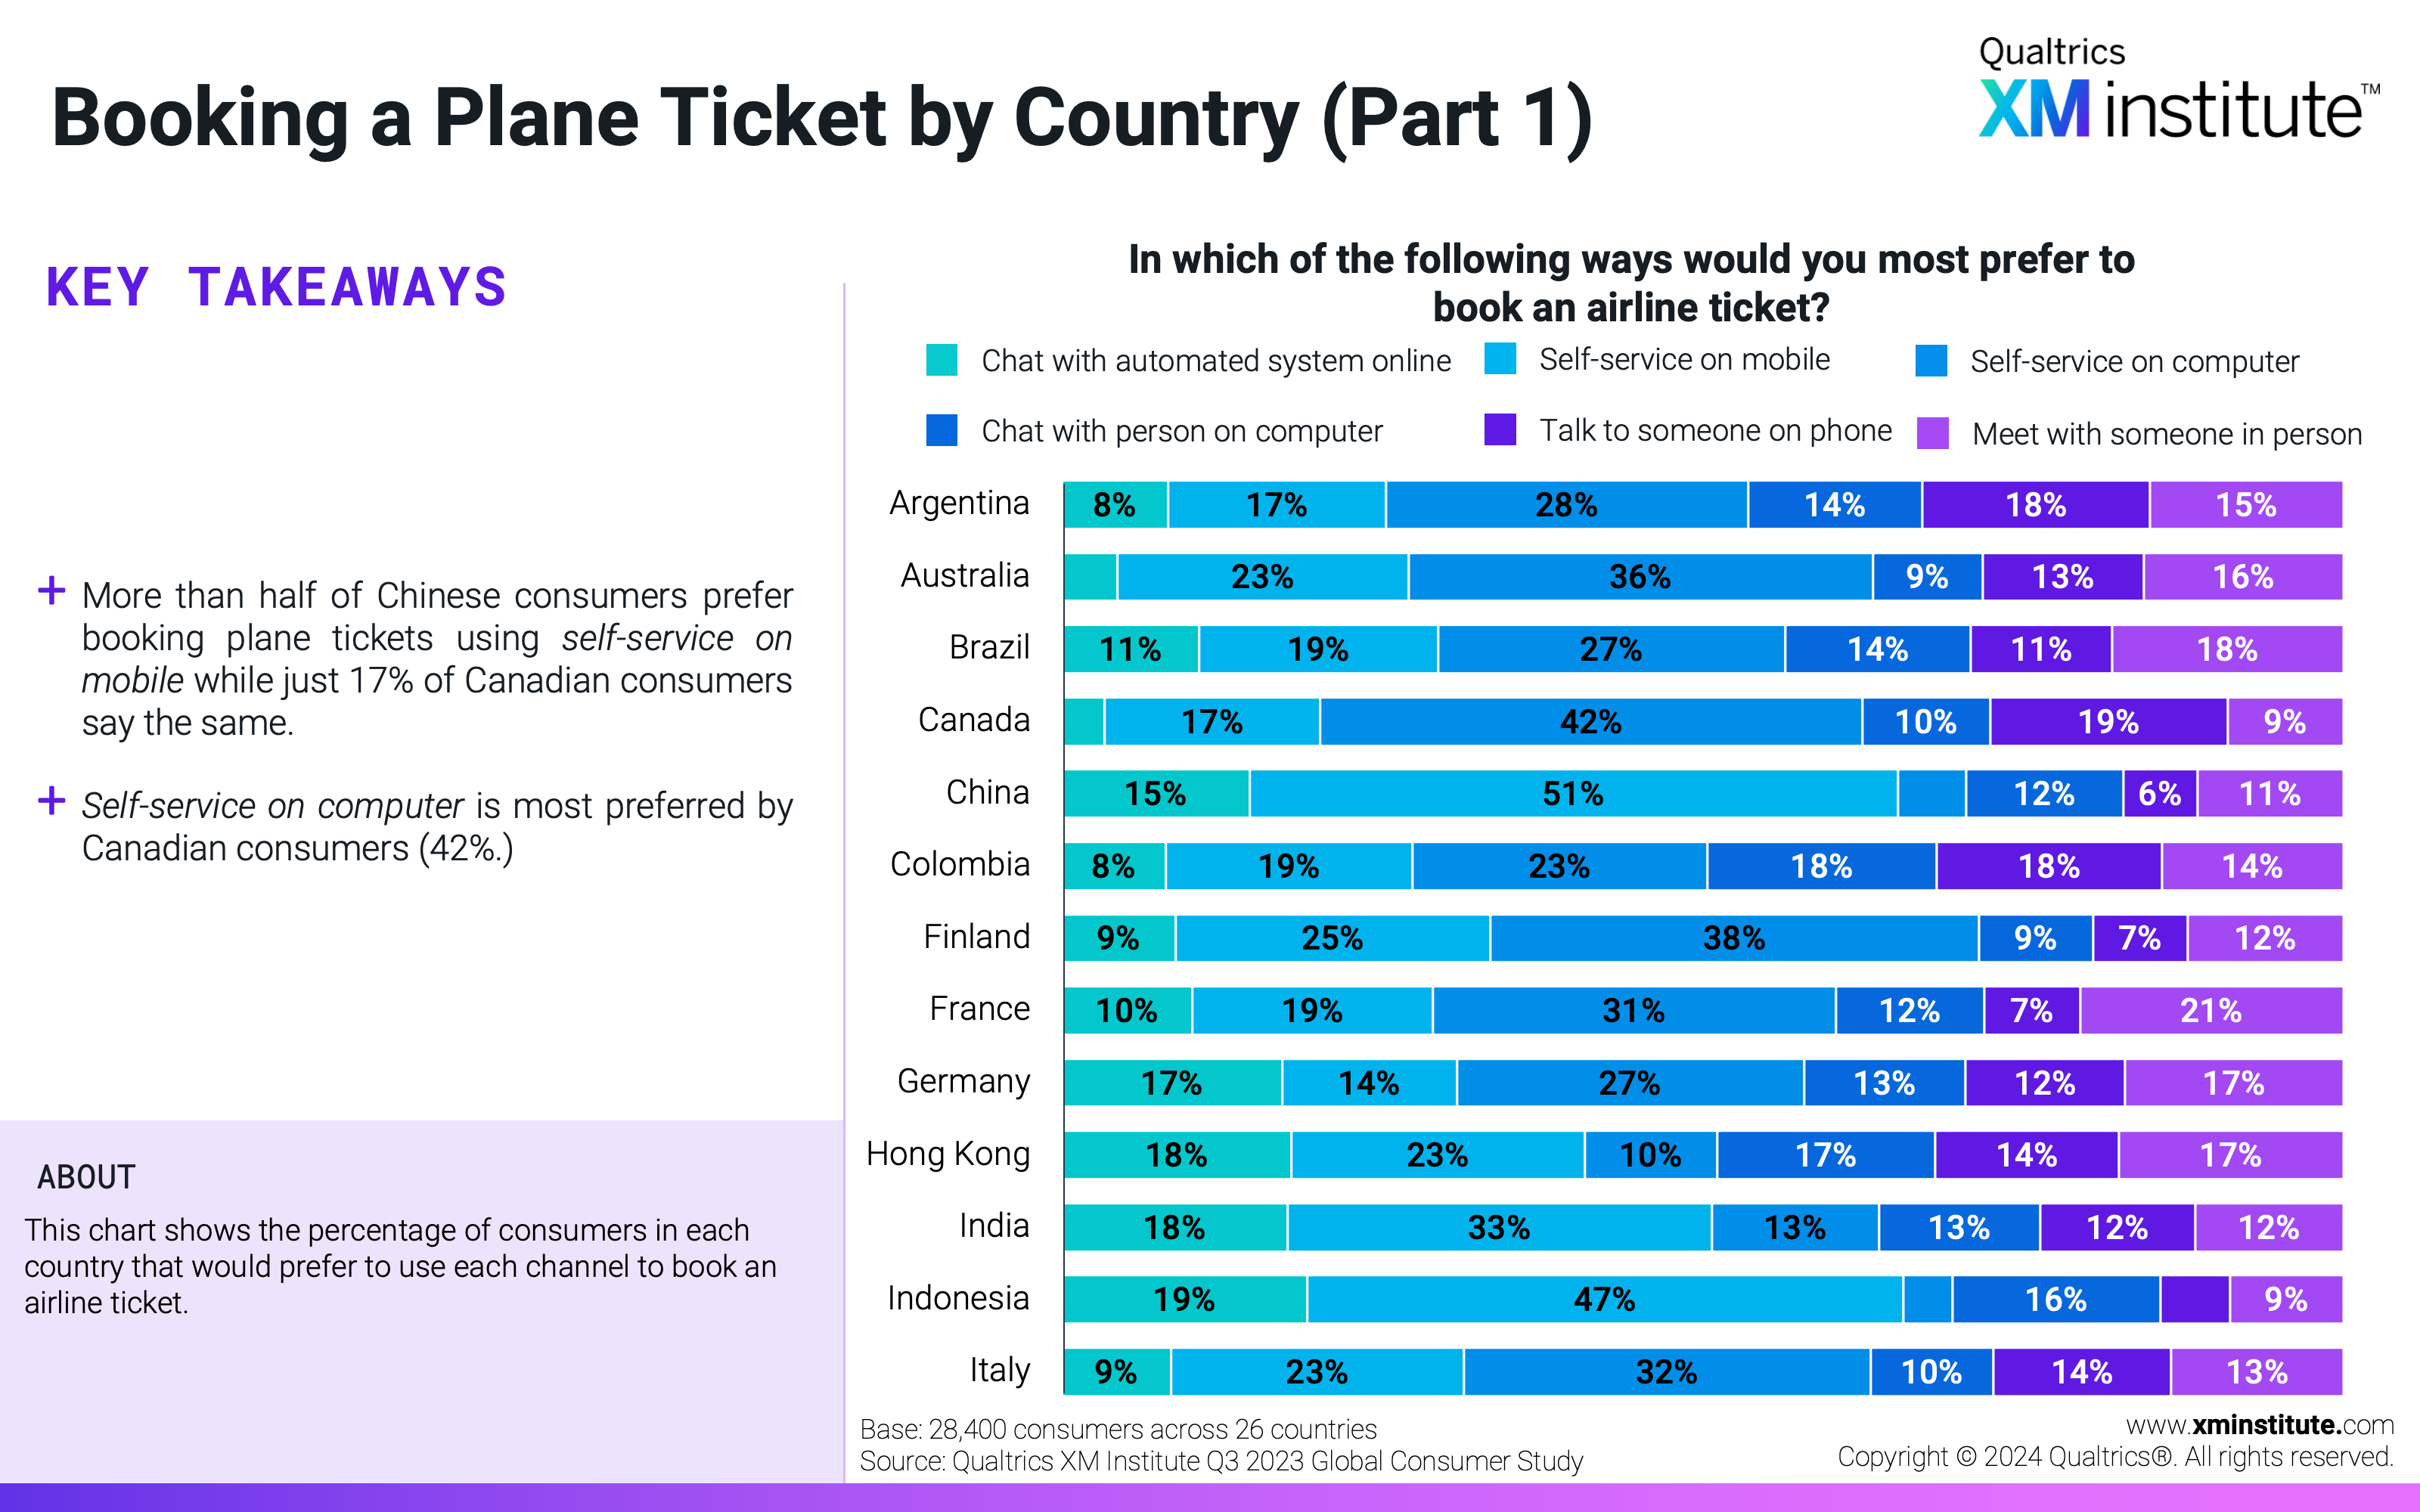 This chart shows the percentage of consumers in each country that would prefer to use each channel to book an airline ticket. 